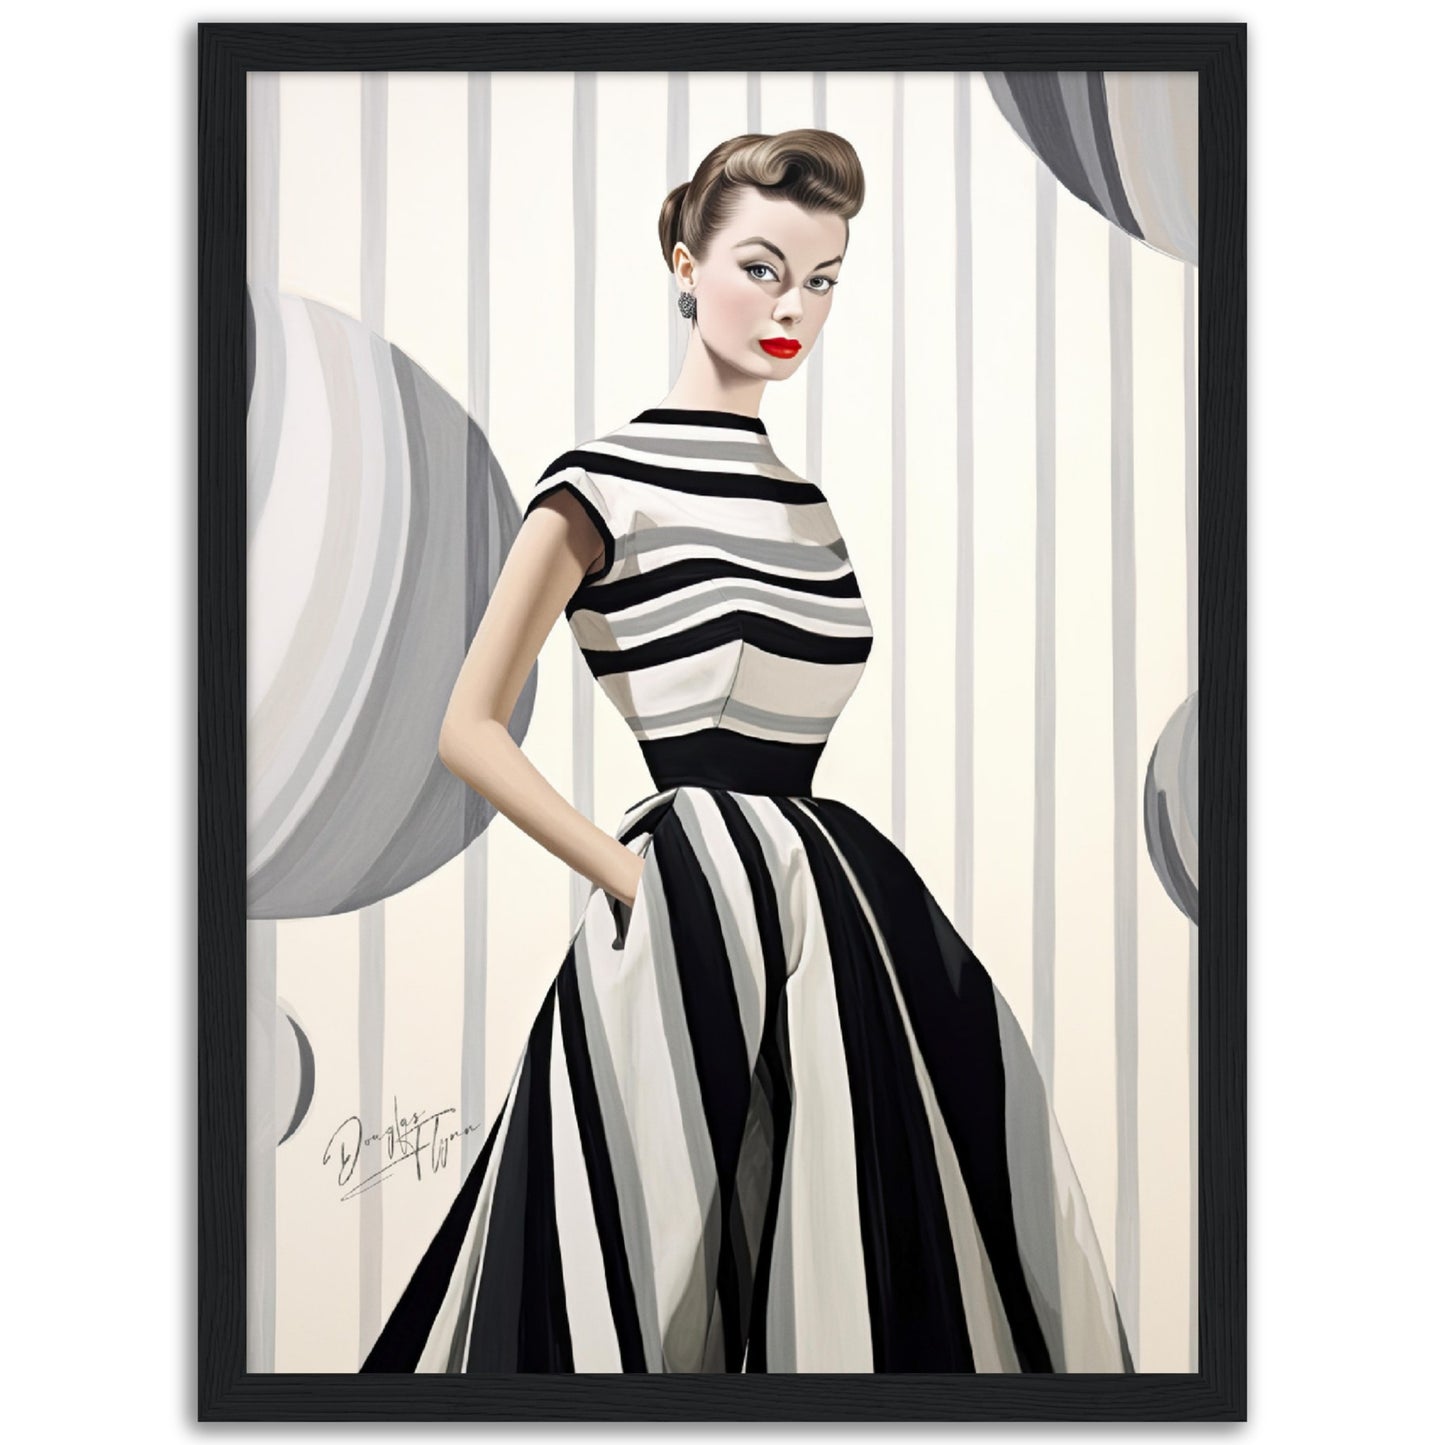 »Black and White Peplum Dress, 1950s with Bold Stripes«